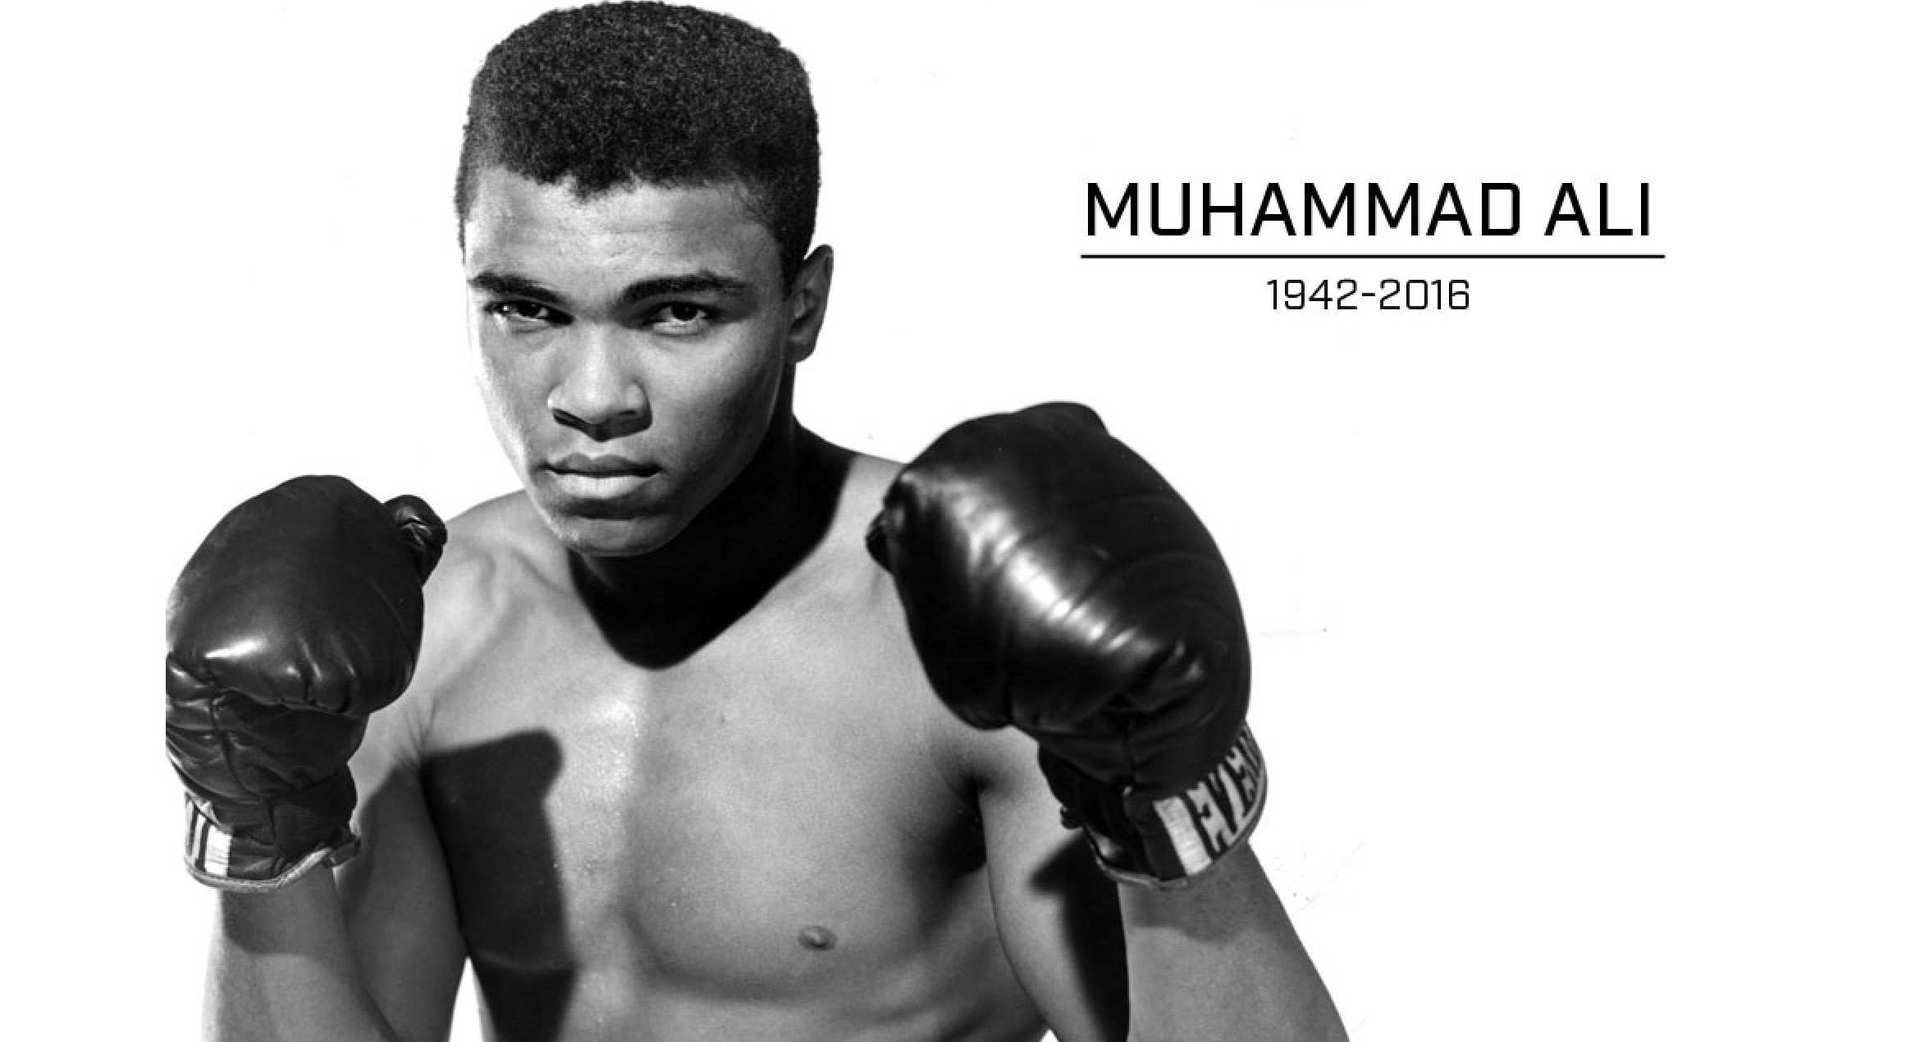 Muhammad Ali was known for his quick footwork and agility in the ring. What was his nickname based on this?